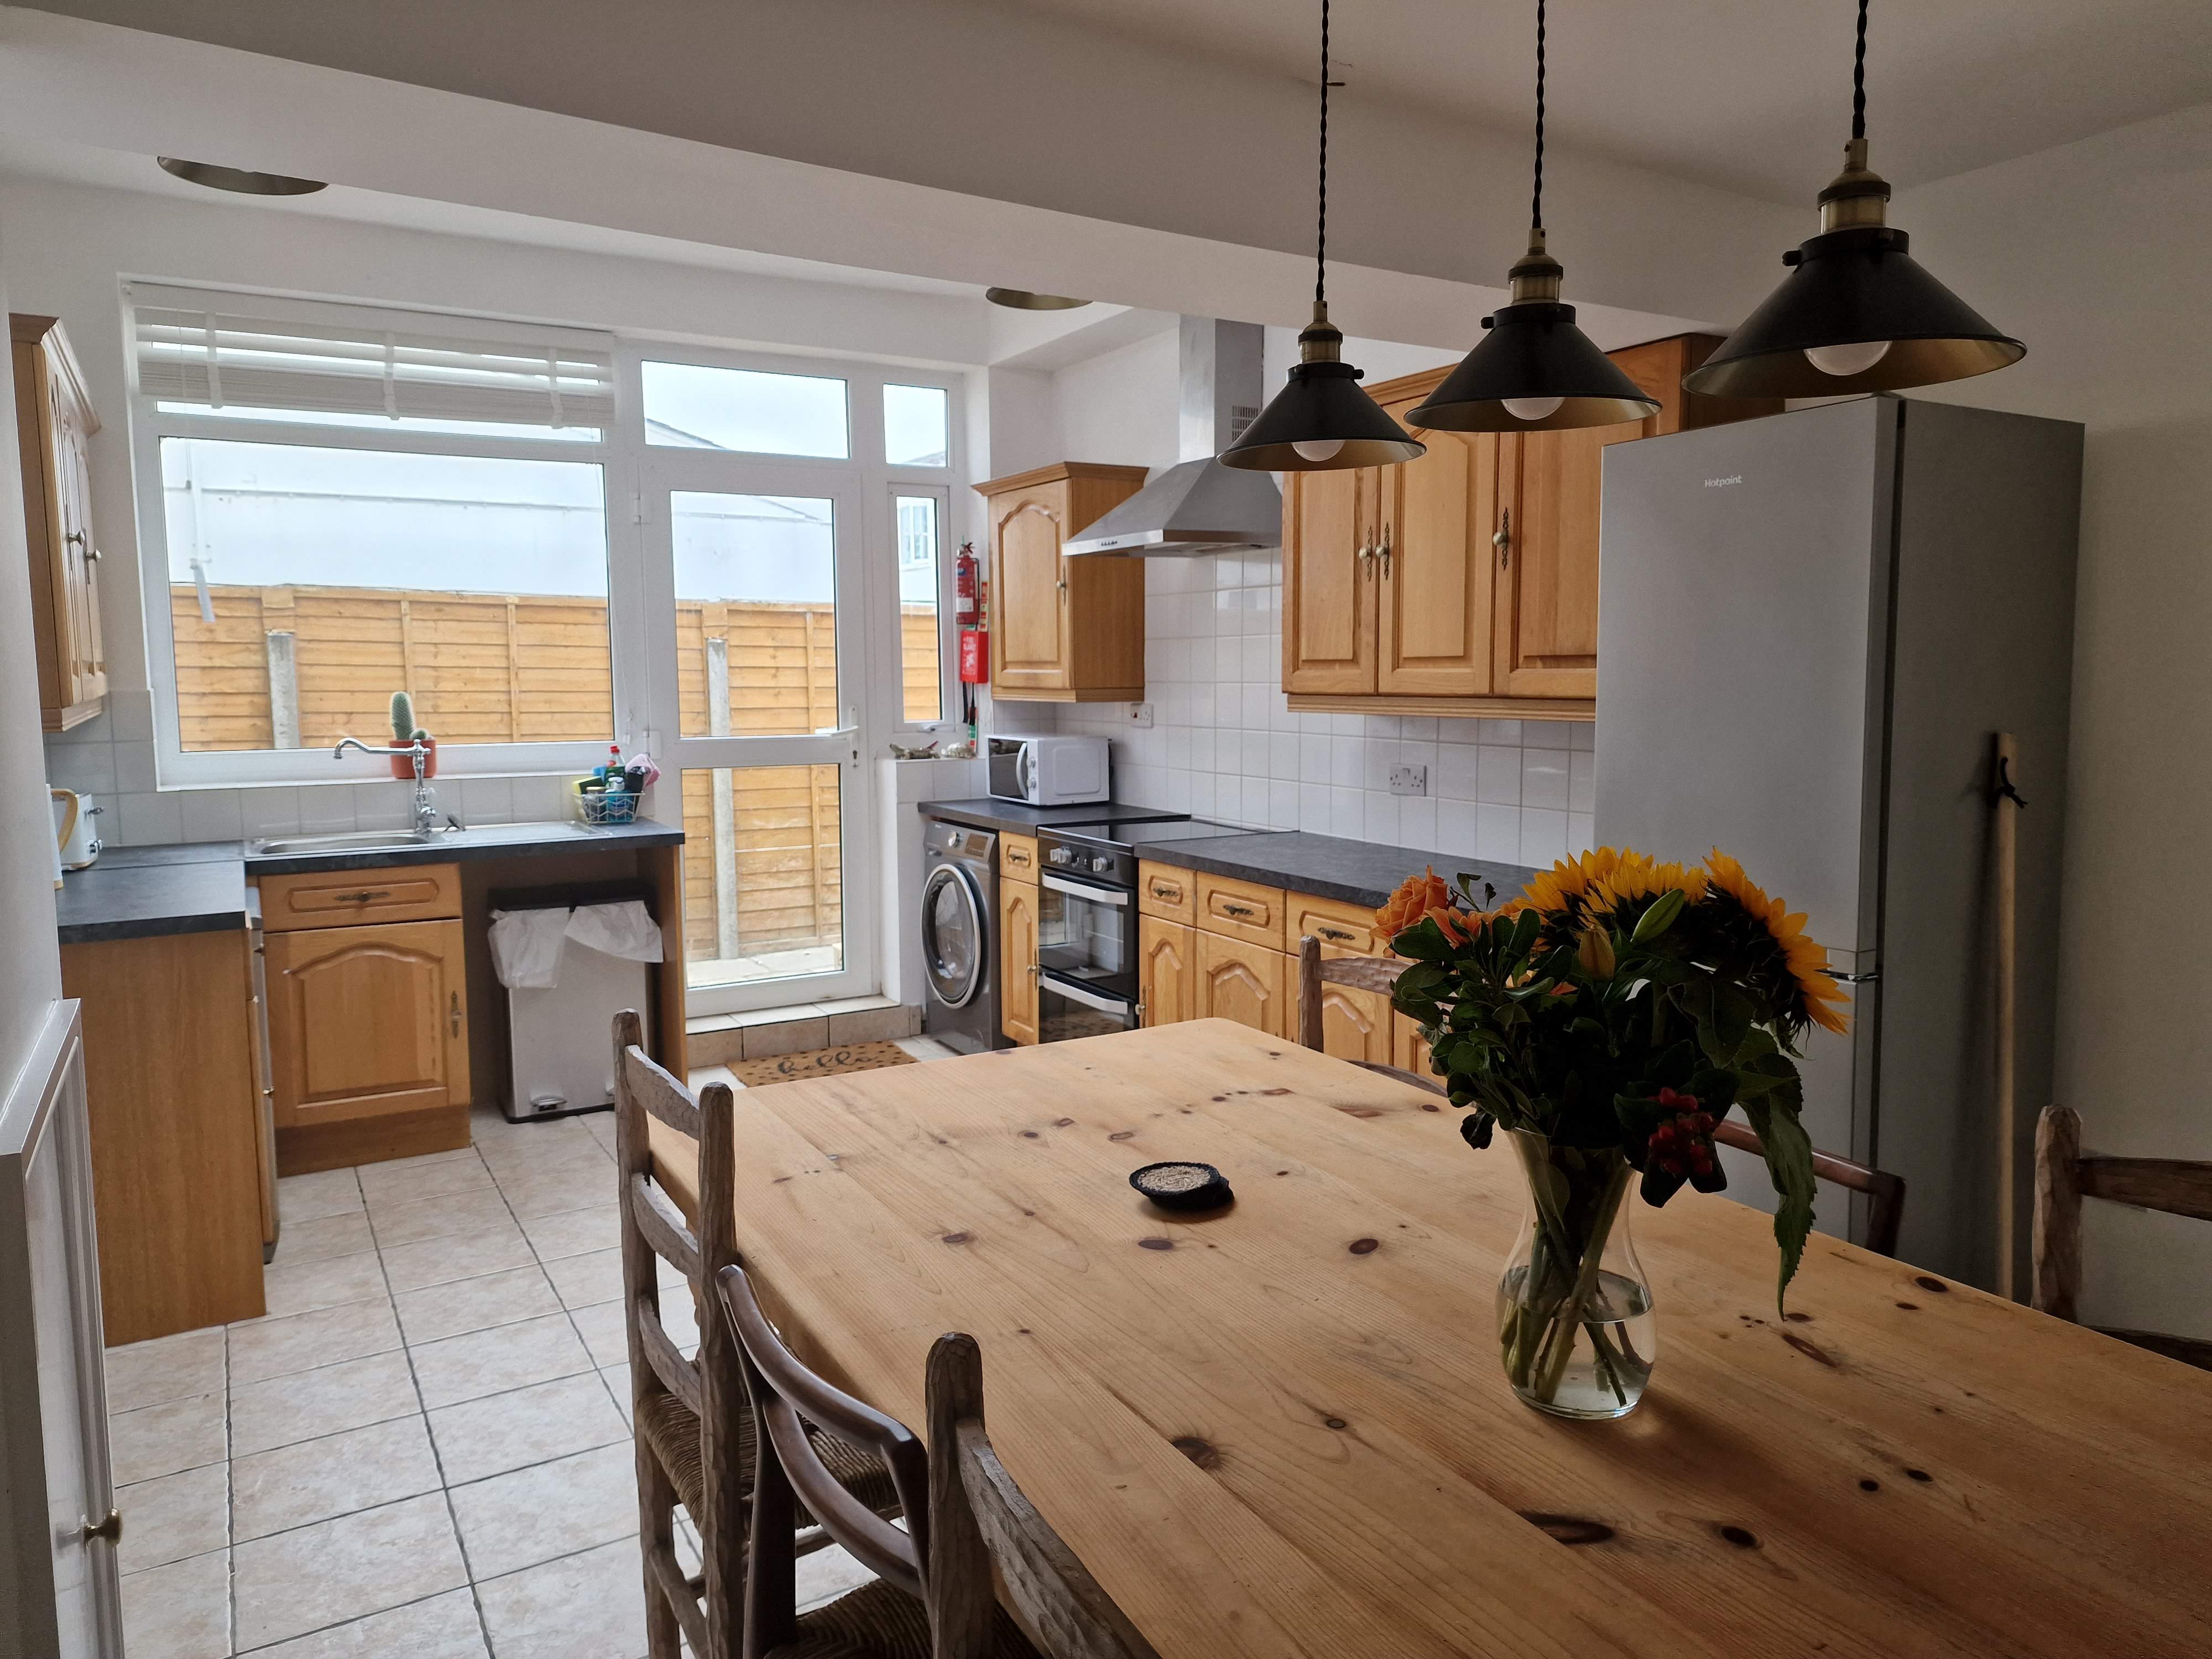 The Cove Portreath - kitchen diner and access to courtyard garden